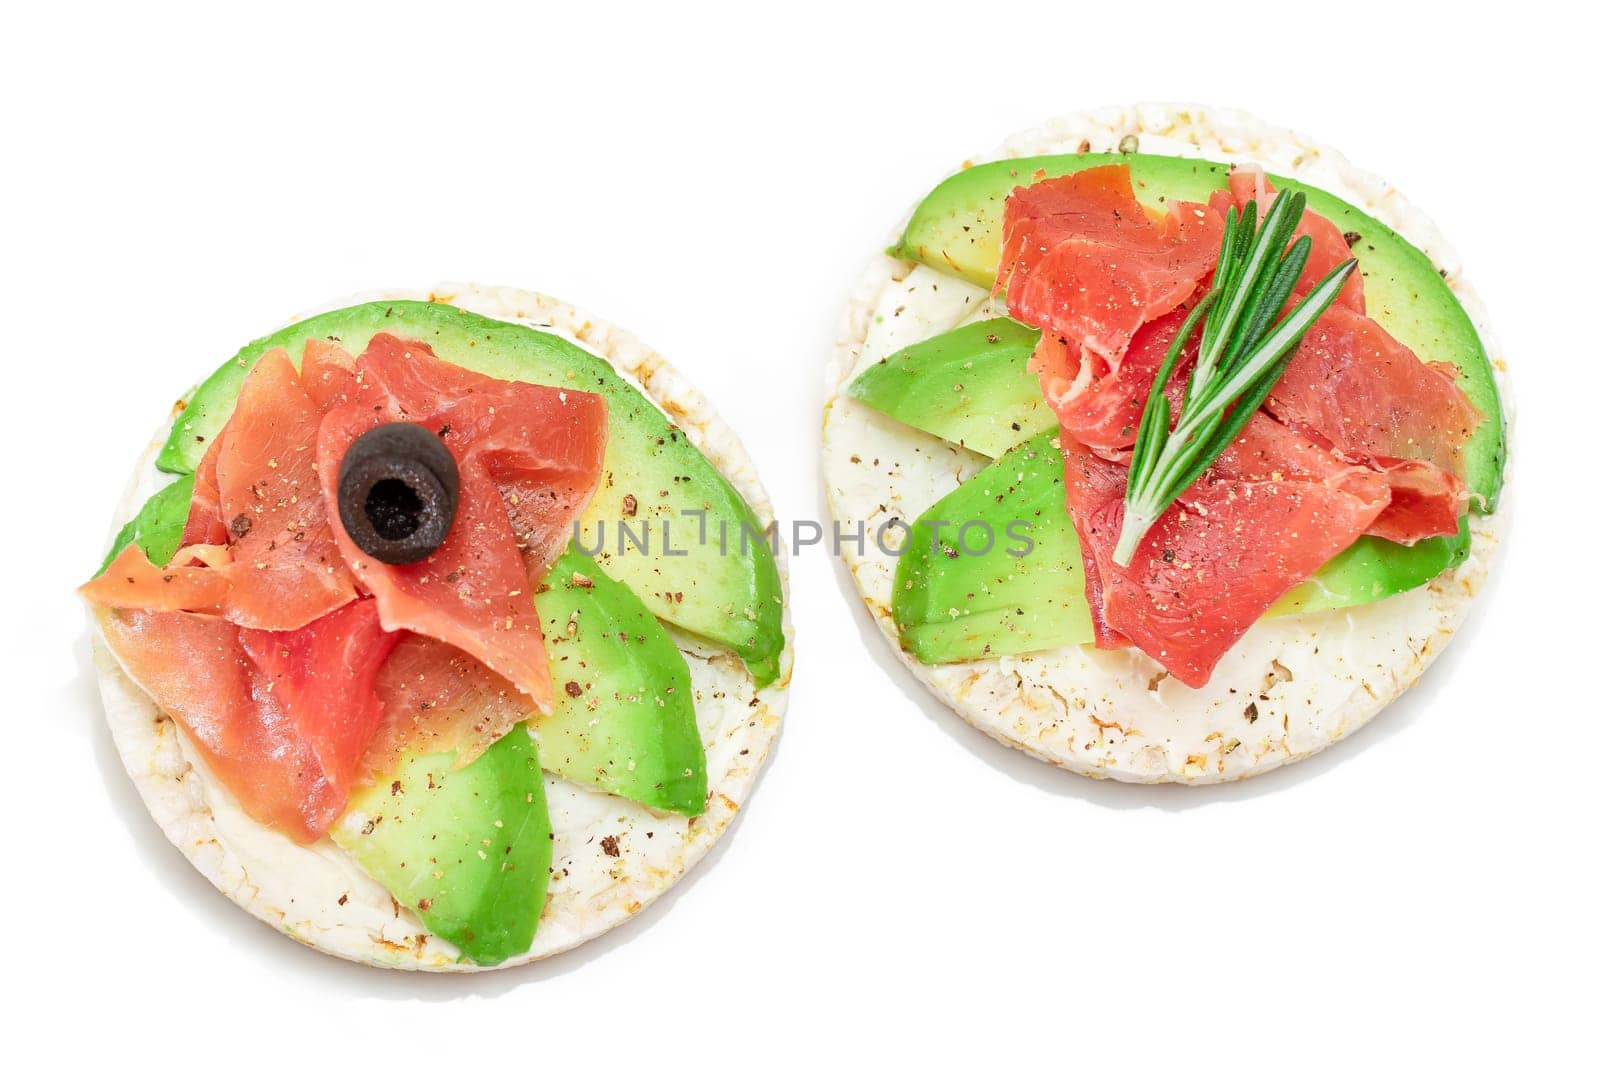 Rice Cake Sandwich with Avocado, Jamon, Olives and Rosemary - Isolated on White. Easy Breakfast. Quick and Healthy Sandwiches. Crispbread with Tasty Filling. Healthy Dietary Snack - Isolation